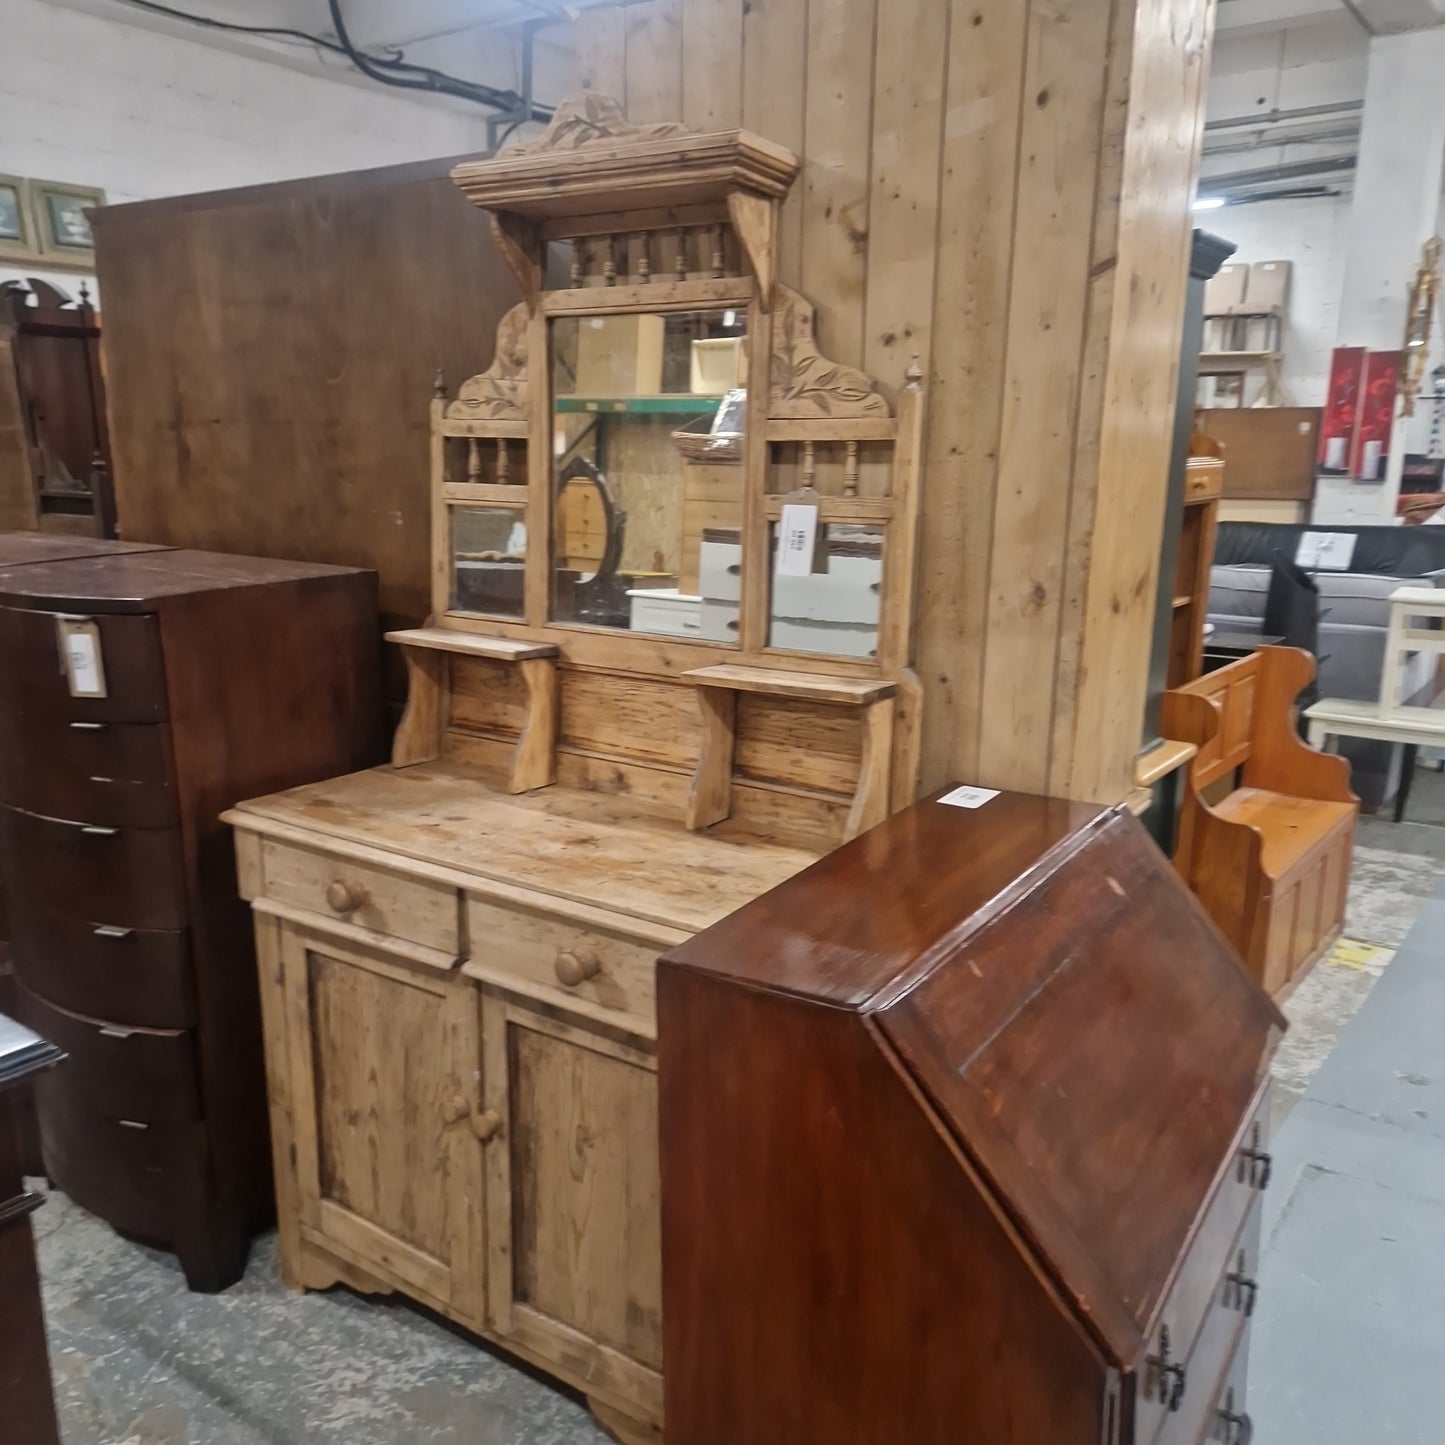 Ornate pitch pine bedroom dresser cw dwrs and mirror Q4123